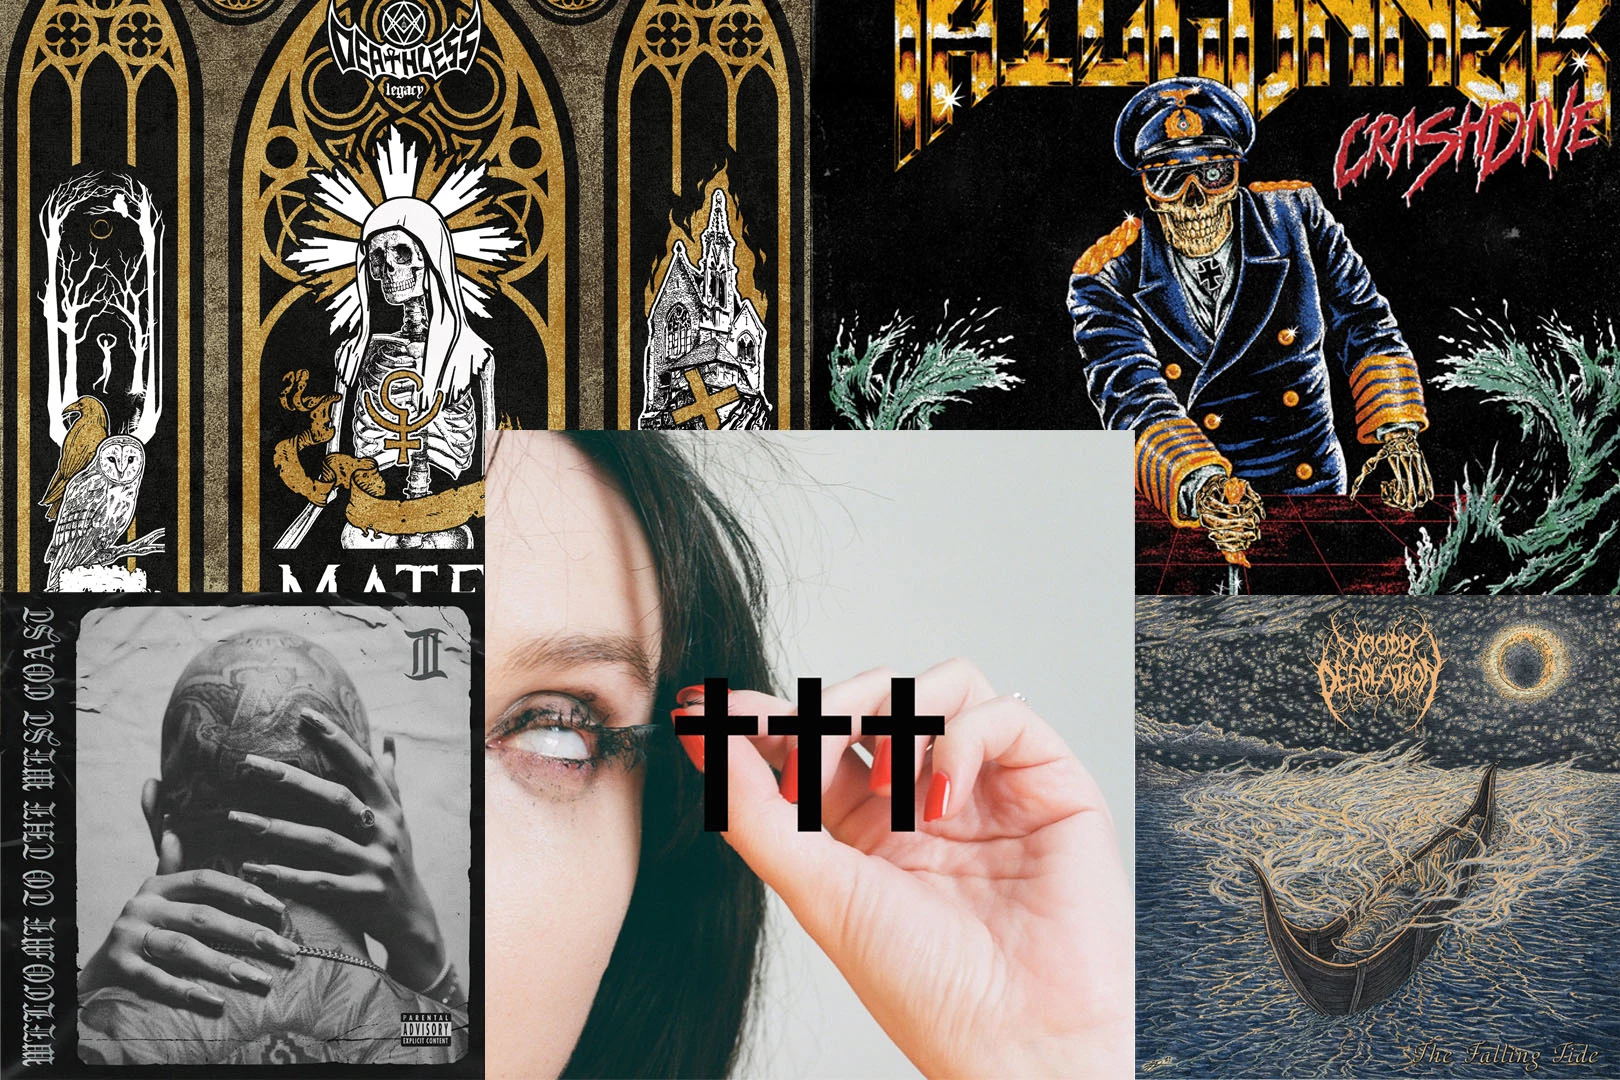 Here Are the New Rock + Metal Albums Out Today (Dec. 9)